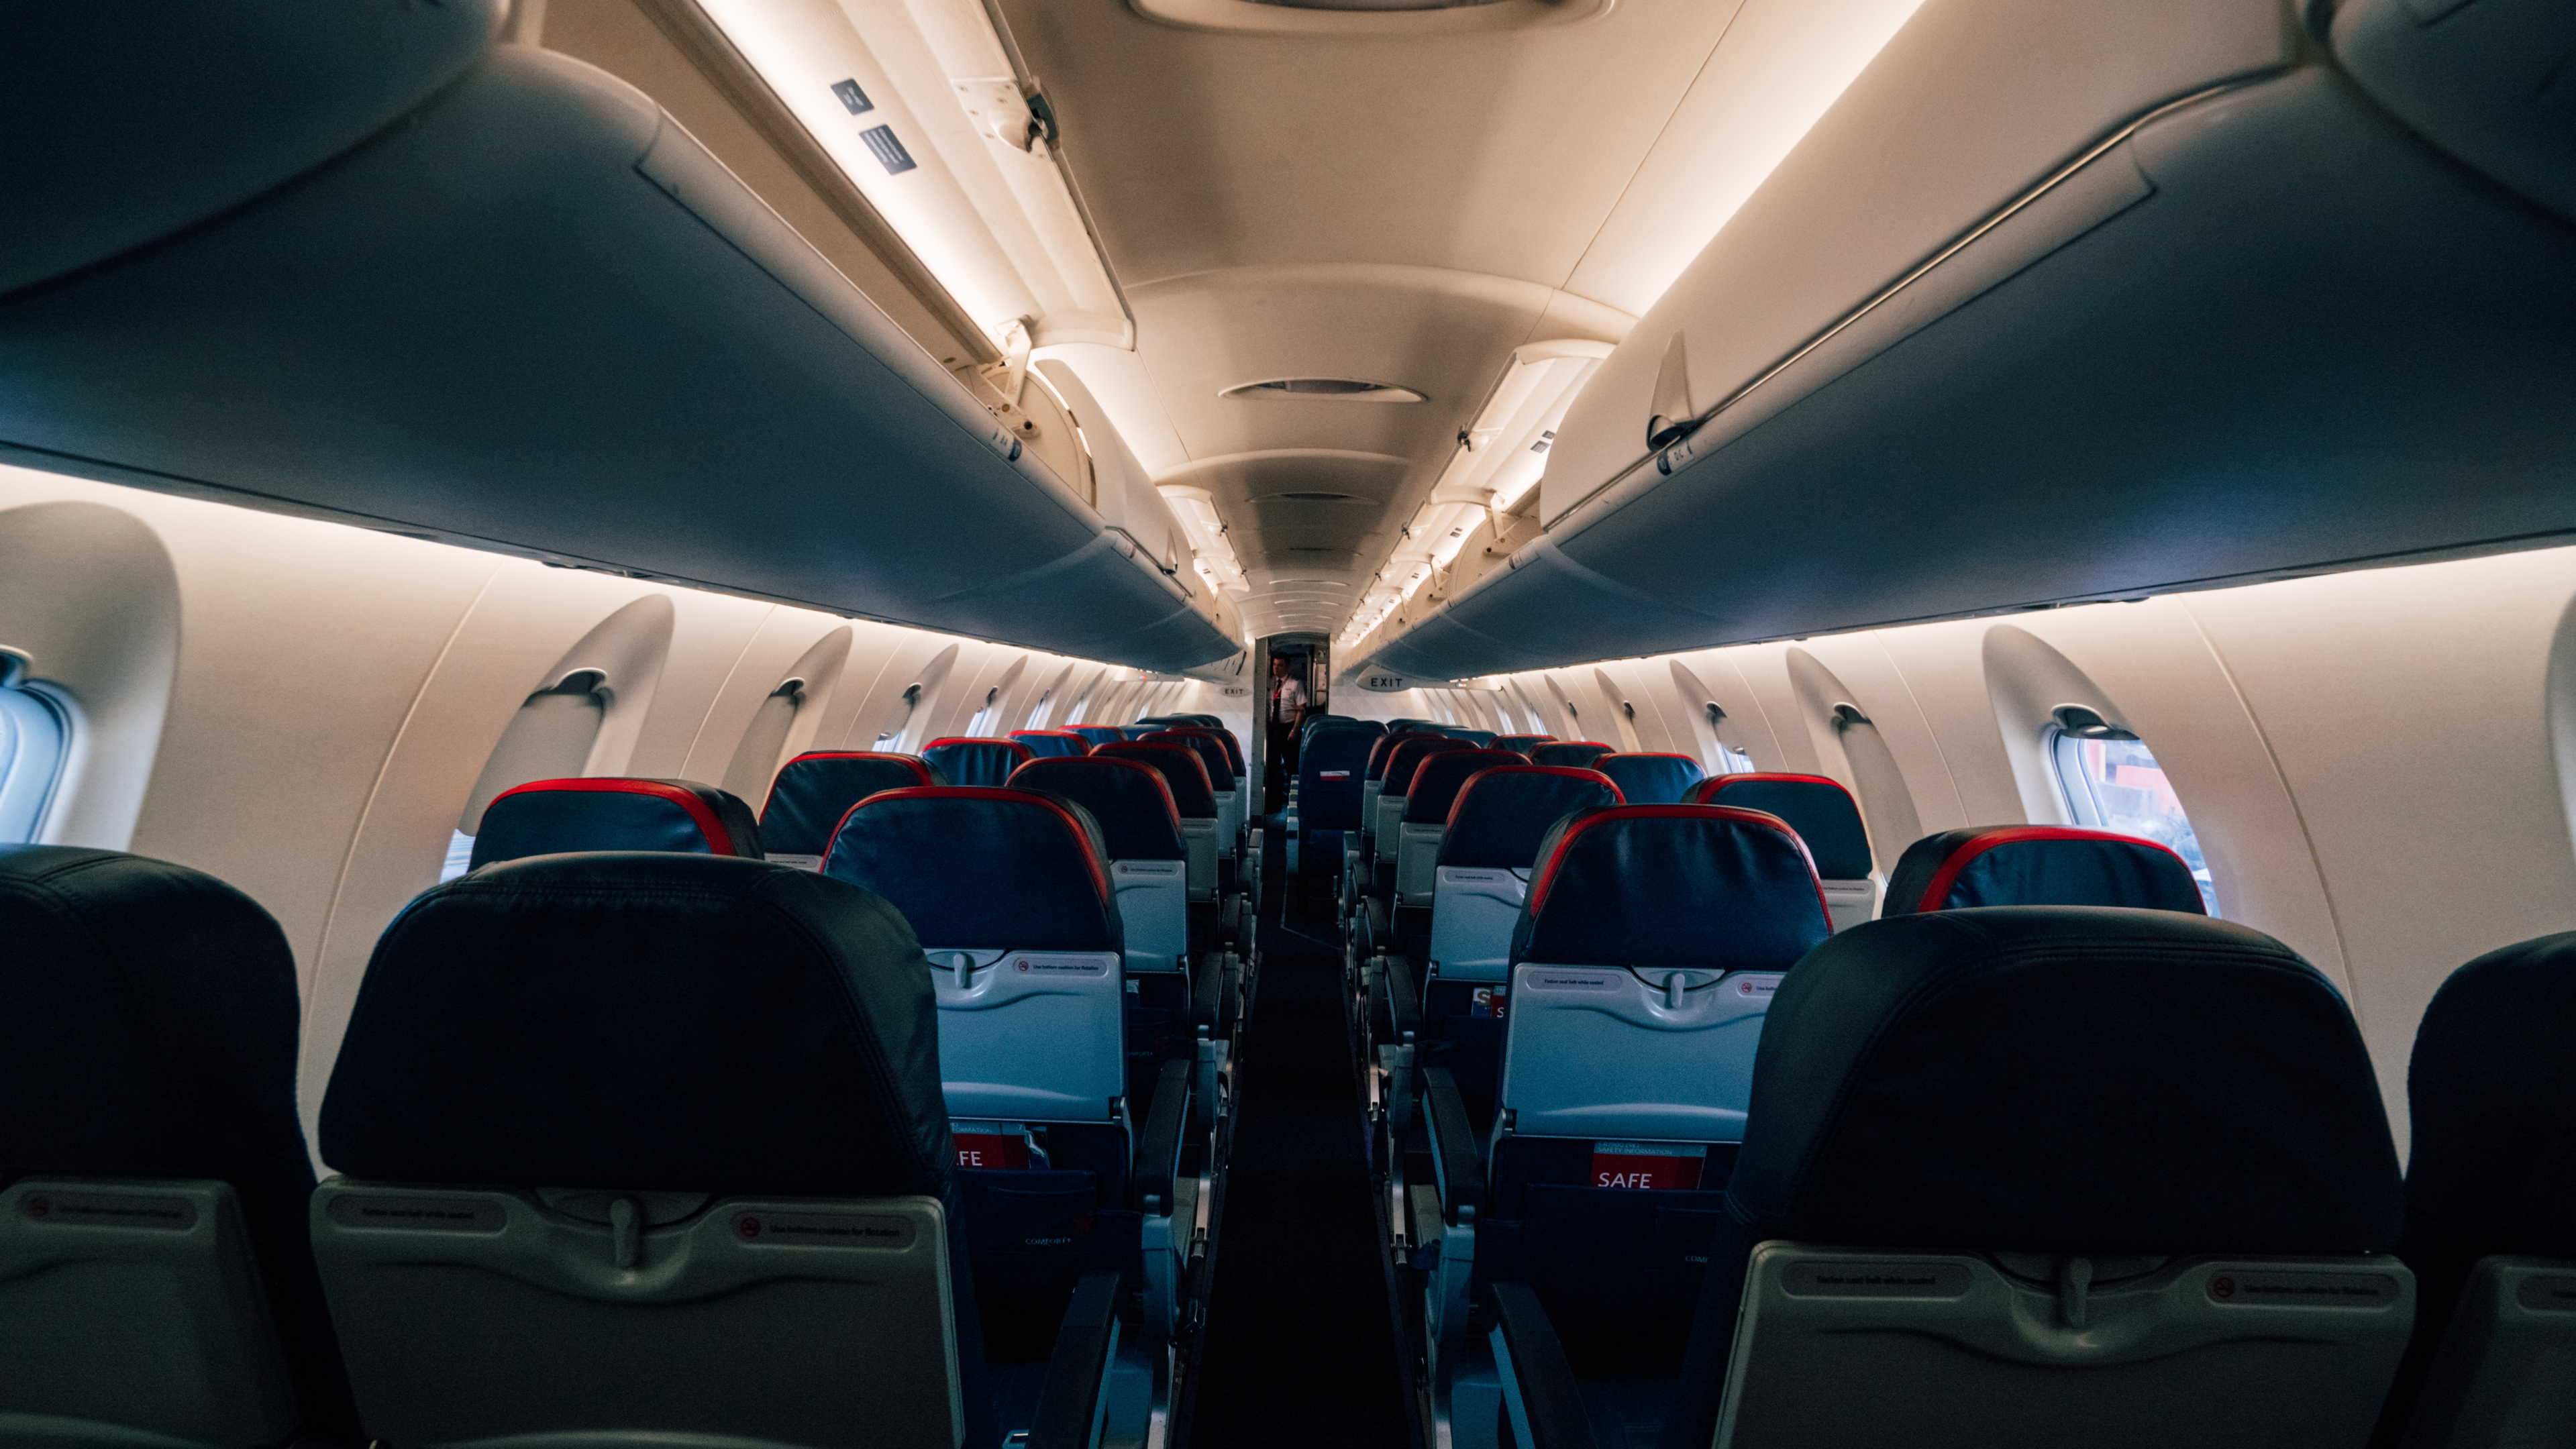 A completely empty airline plane